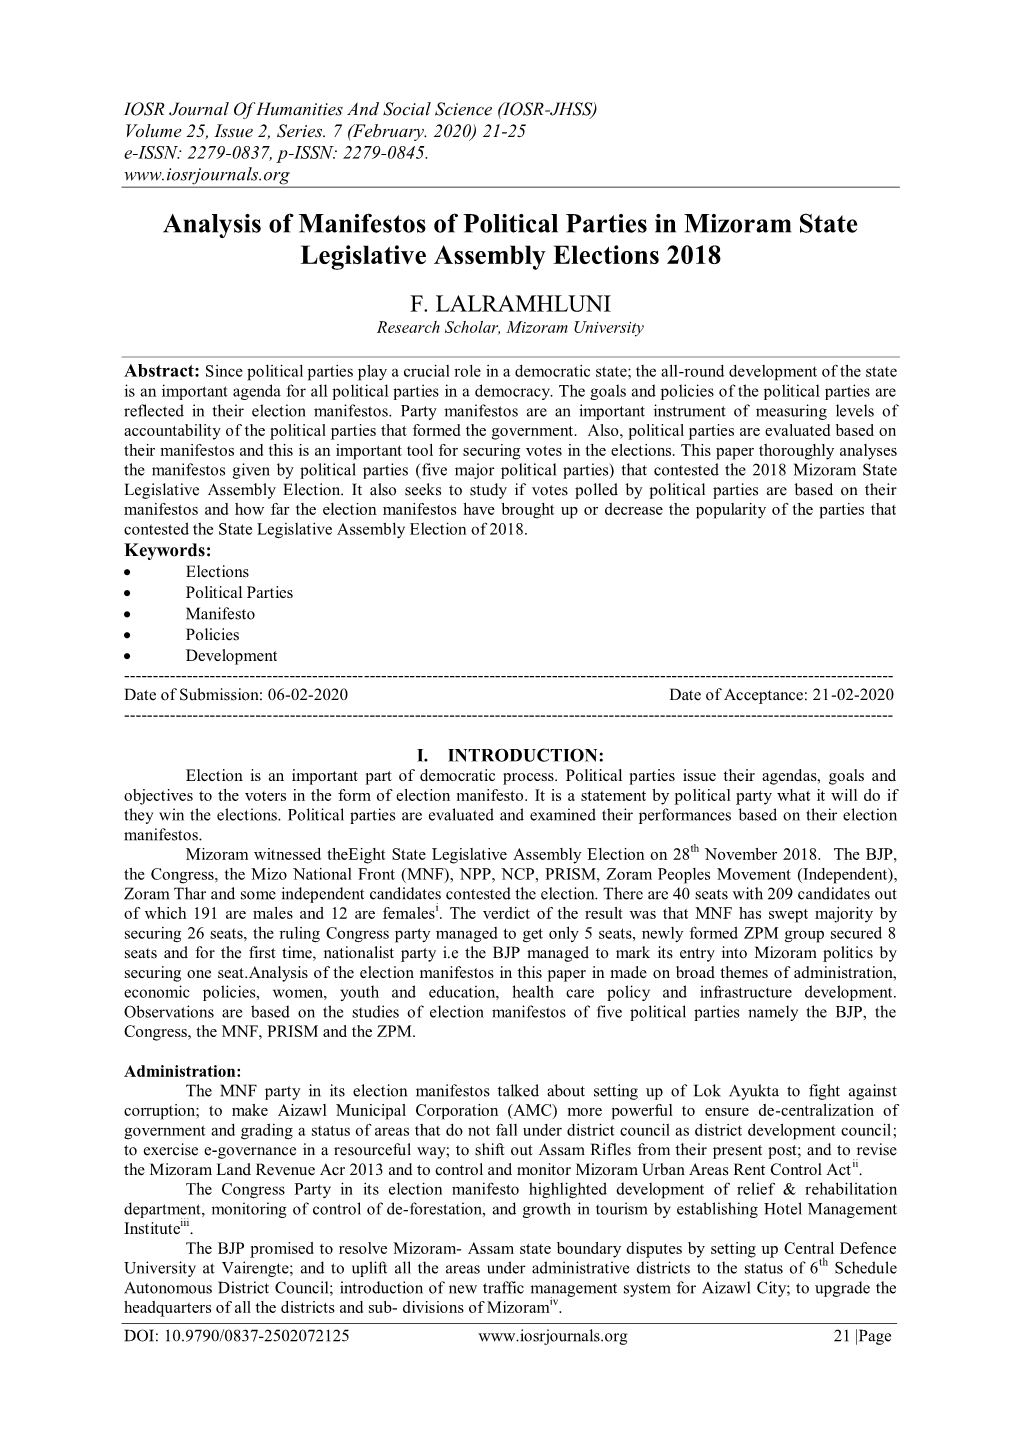 Analysis of Manifestos of Political Parties in Mizoram State Legislative Assembly Elections 2018